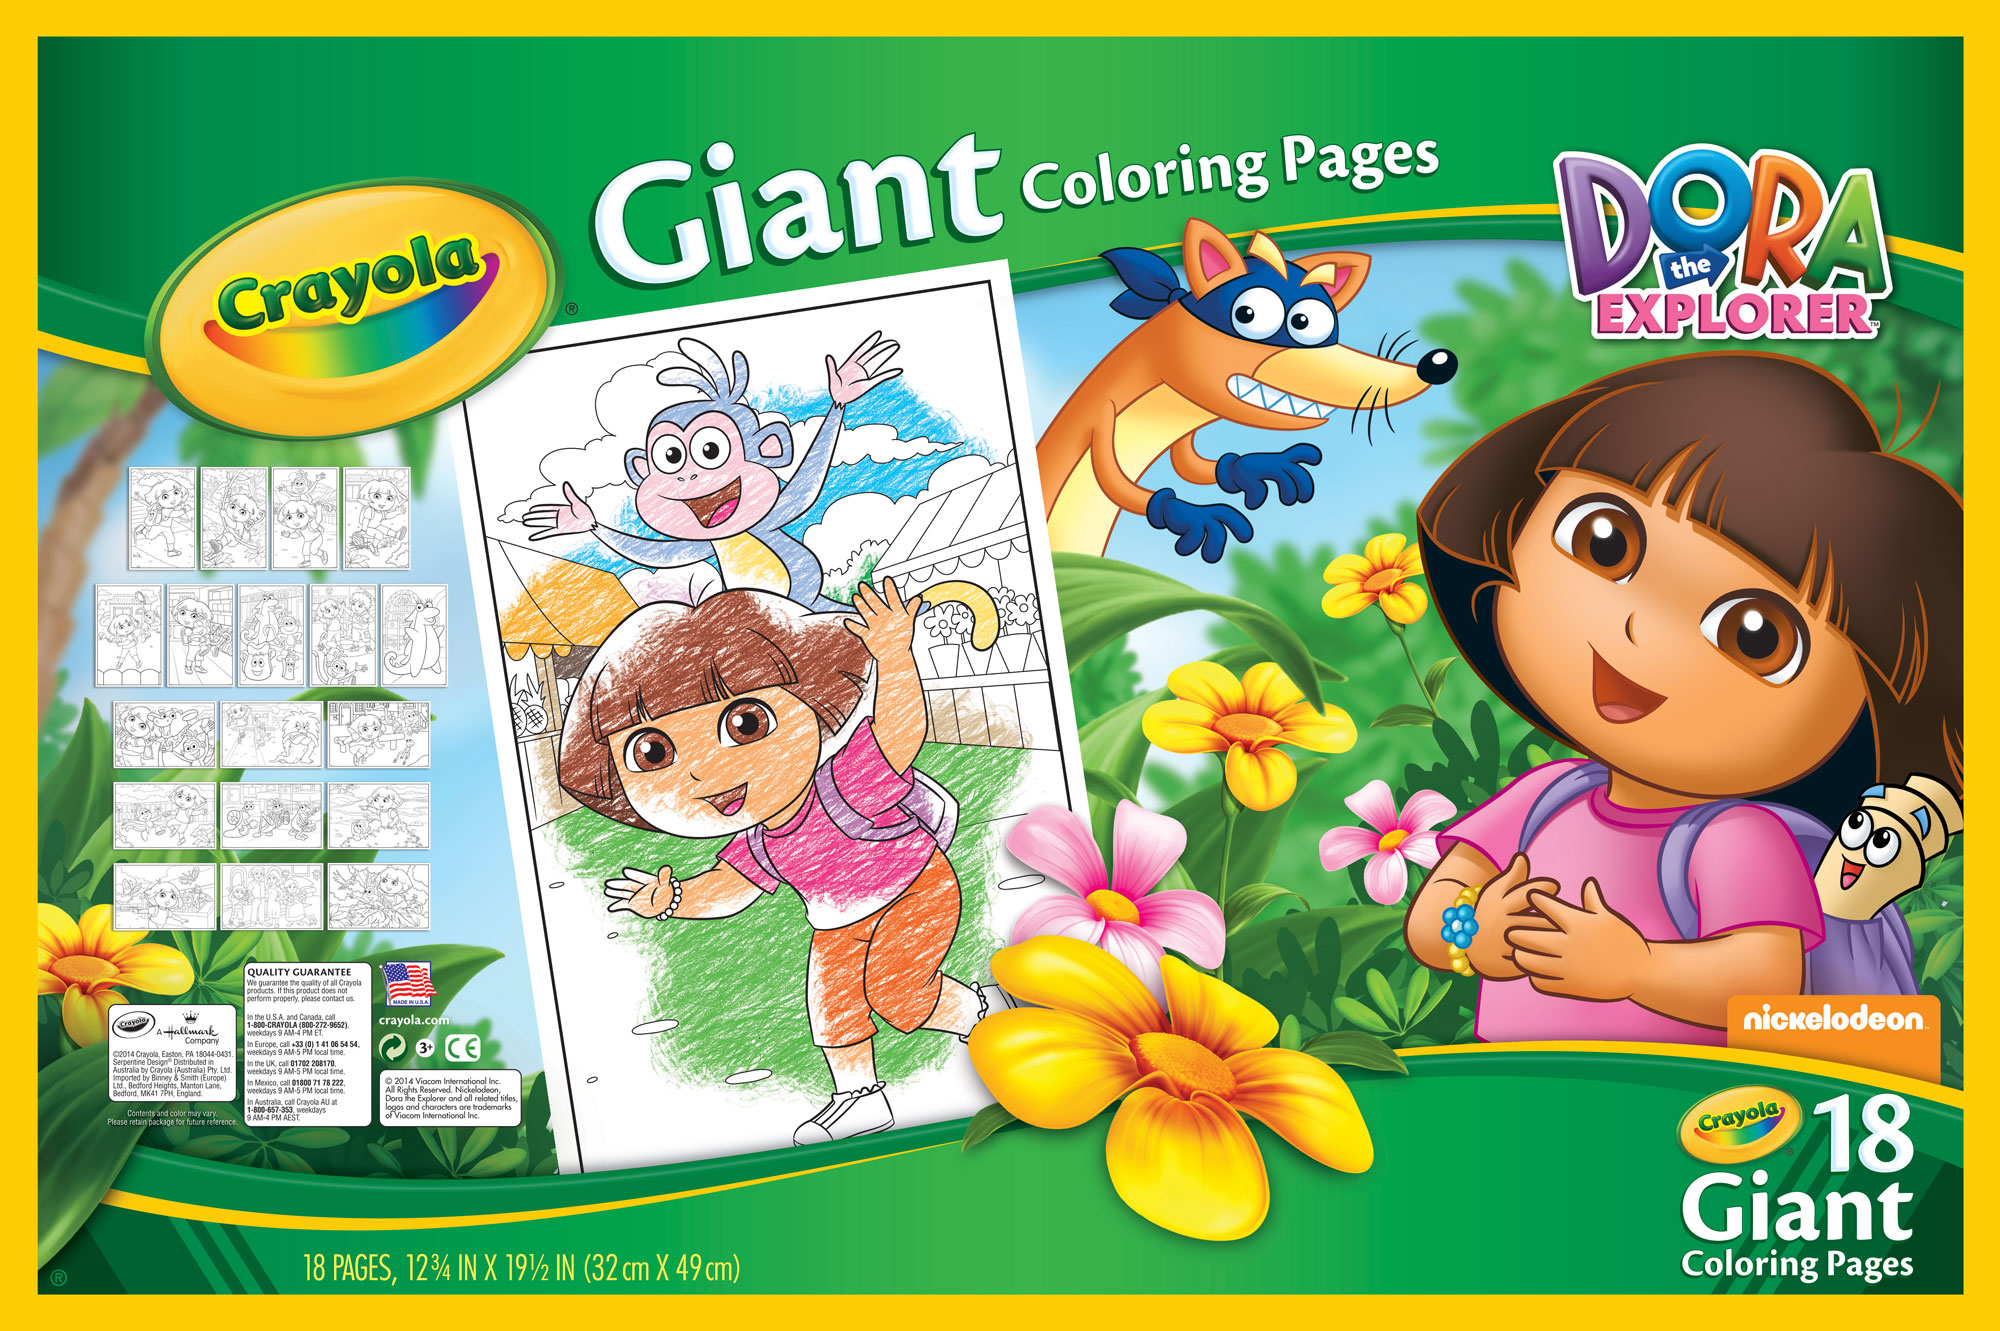 giant-coloring-pages-dora-the-explorer-crayola